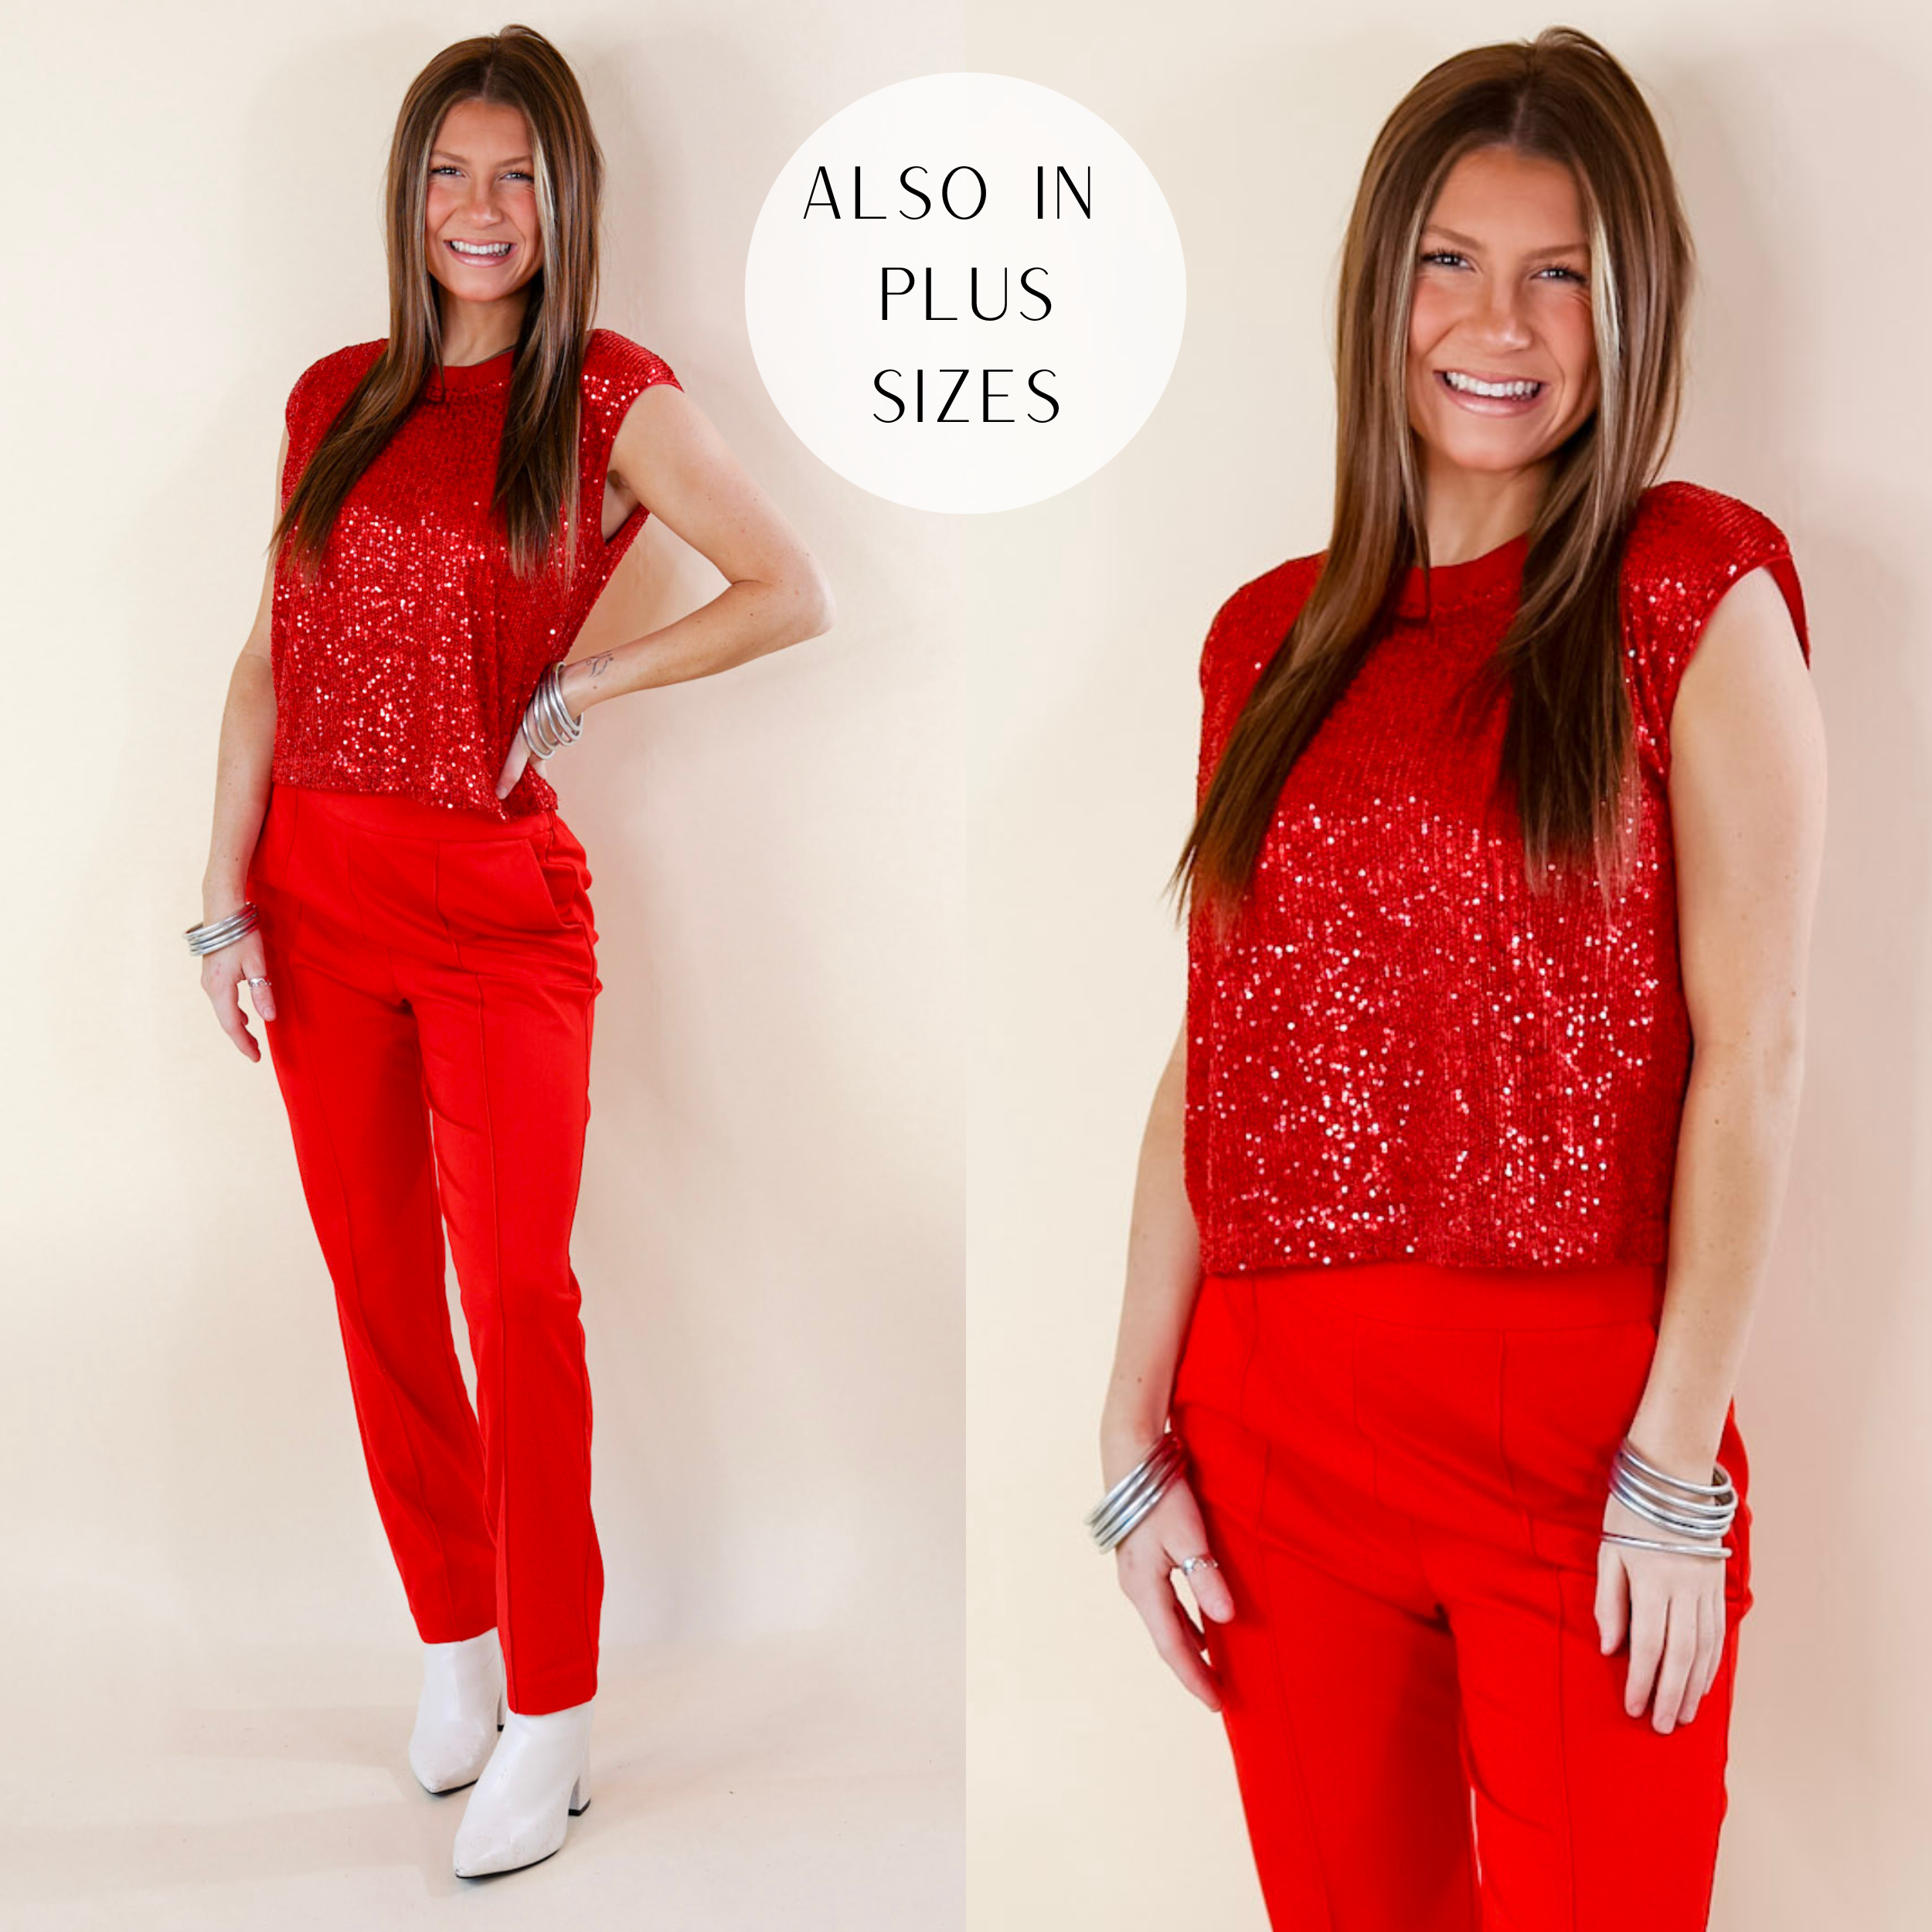 Model is wearing a red sequin sleeveless top paired with BuDhaGirl bracelets, red pants, and white booties. 